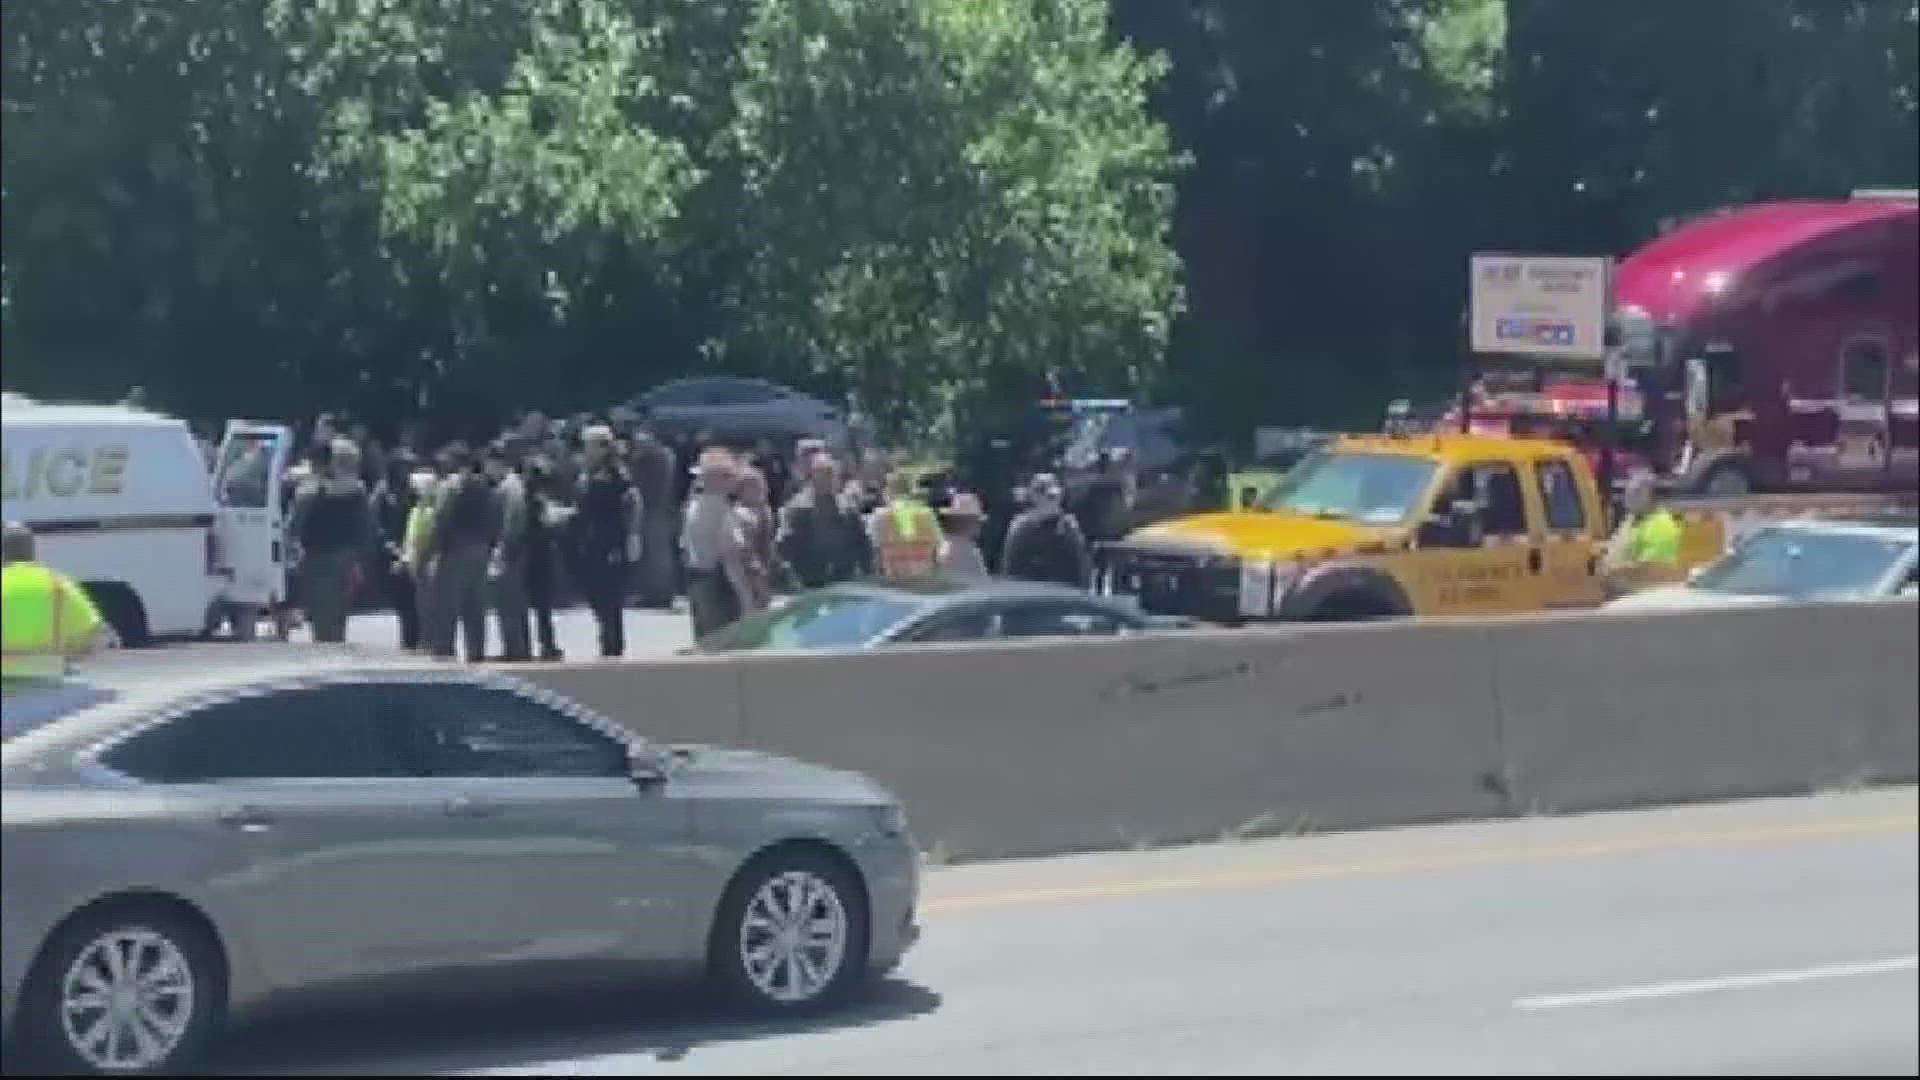 Police say 14 people were arrested after the protest, which tied up traffic near exit 30, at U.S. 29/Colesville Road for about 90 minutes.